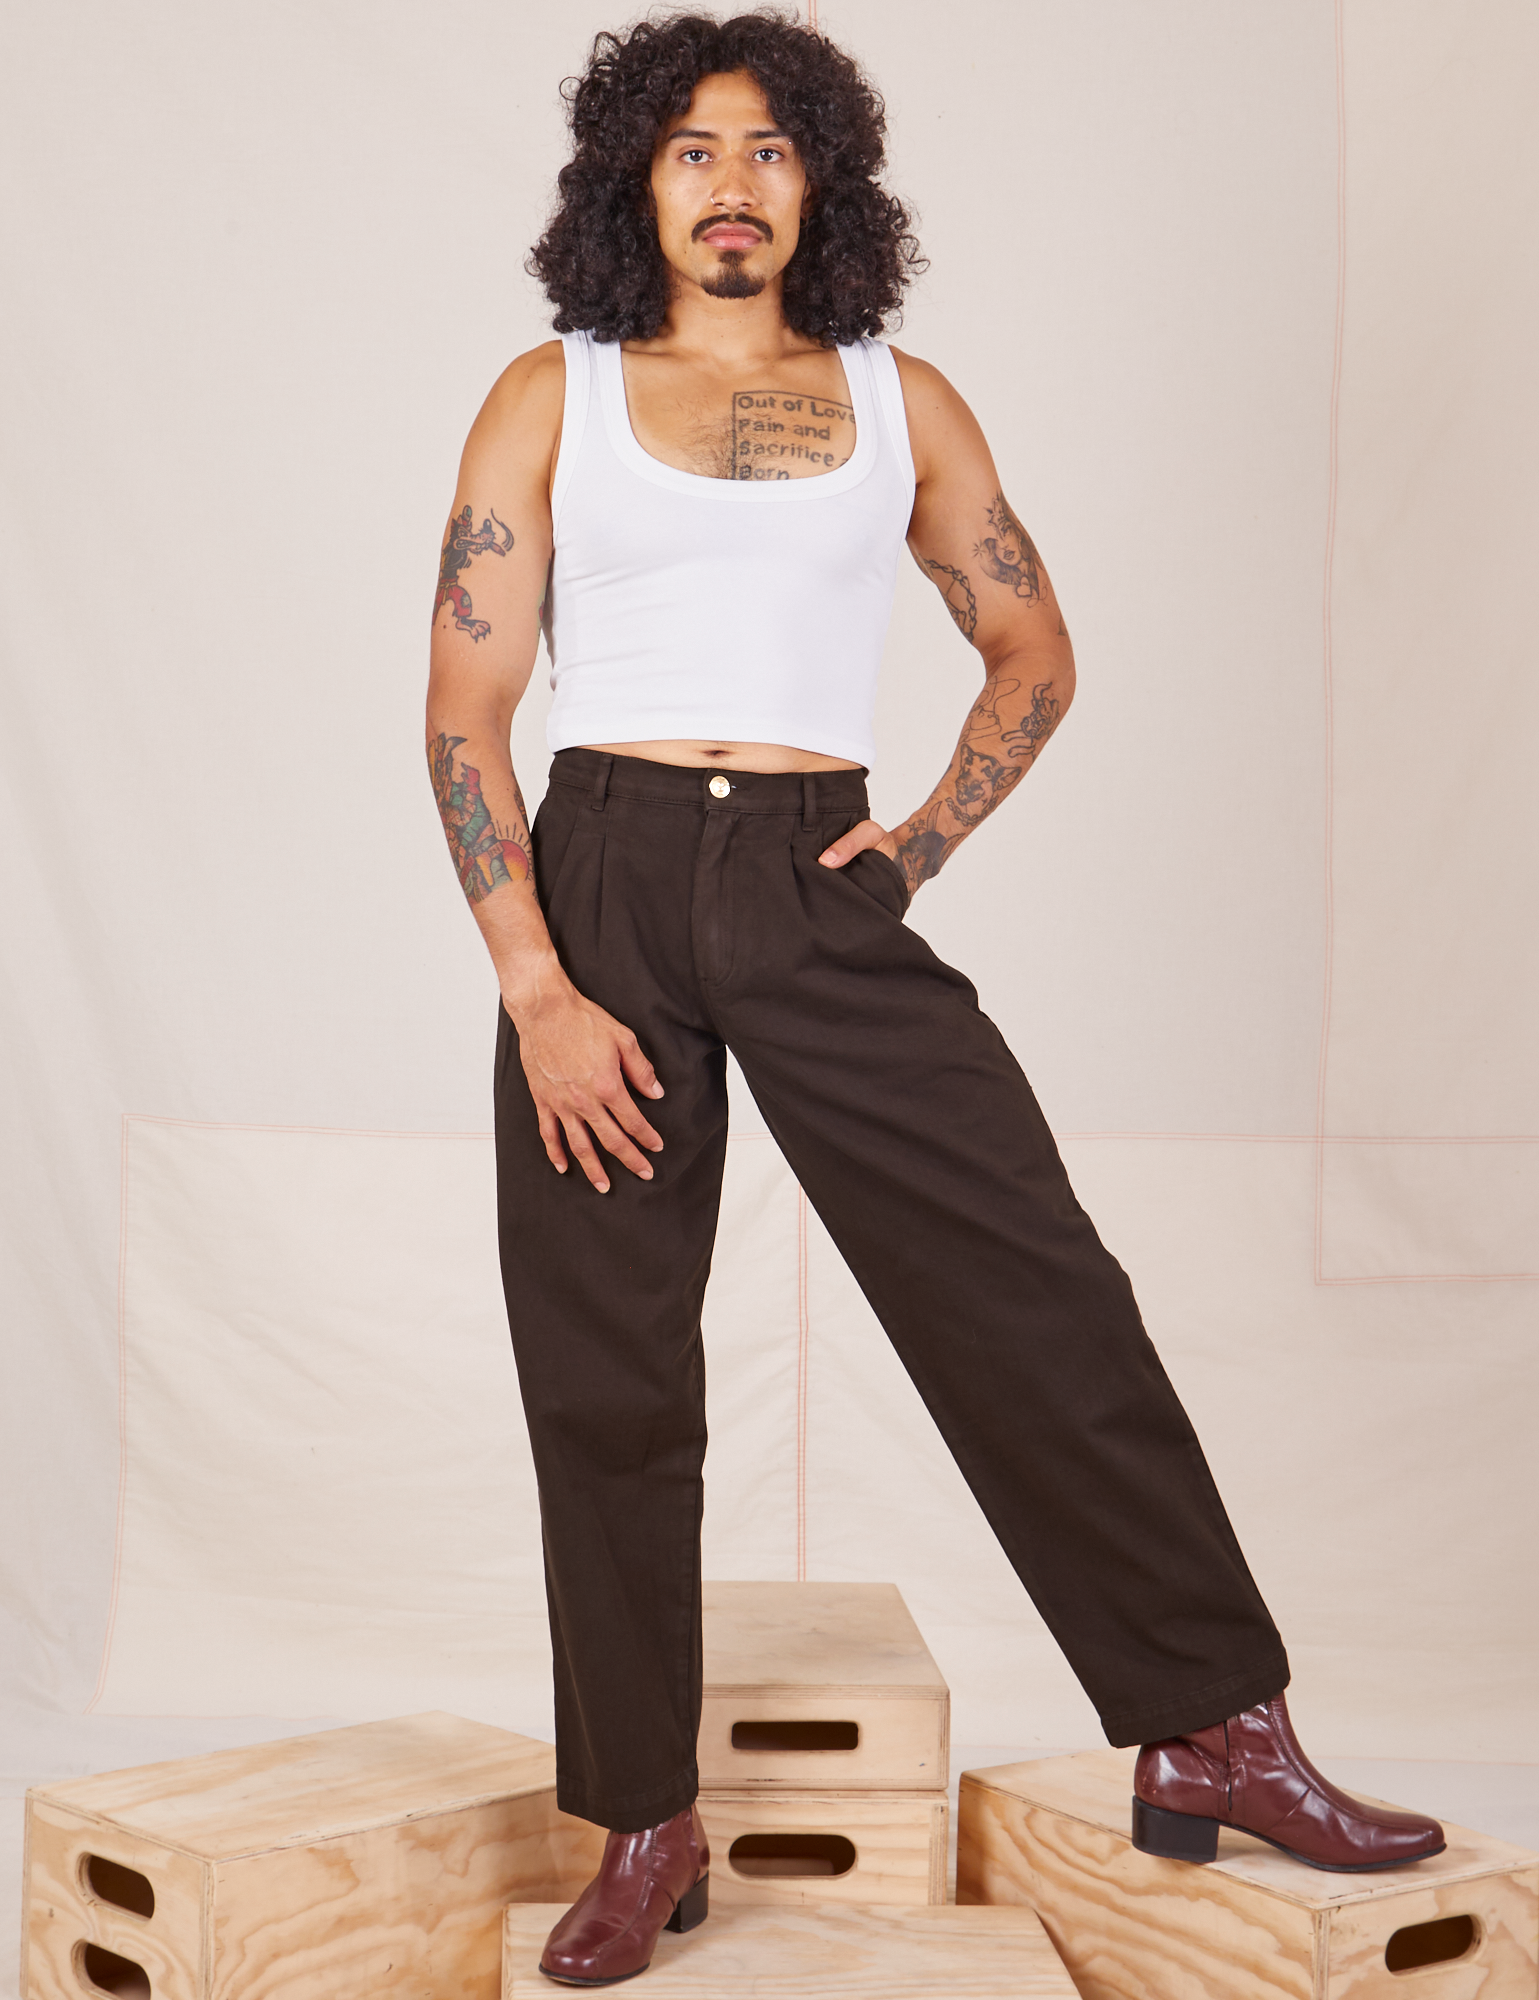 Jesse is 5&#39;8&quot; and wearing XXS Heavyweight Trousers in Espresso Brown paired with Cropped Tank Top in vintage tee off-white